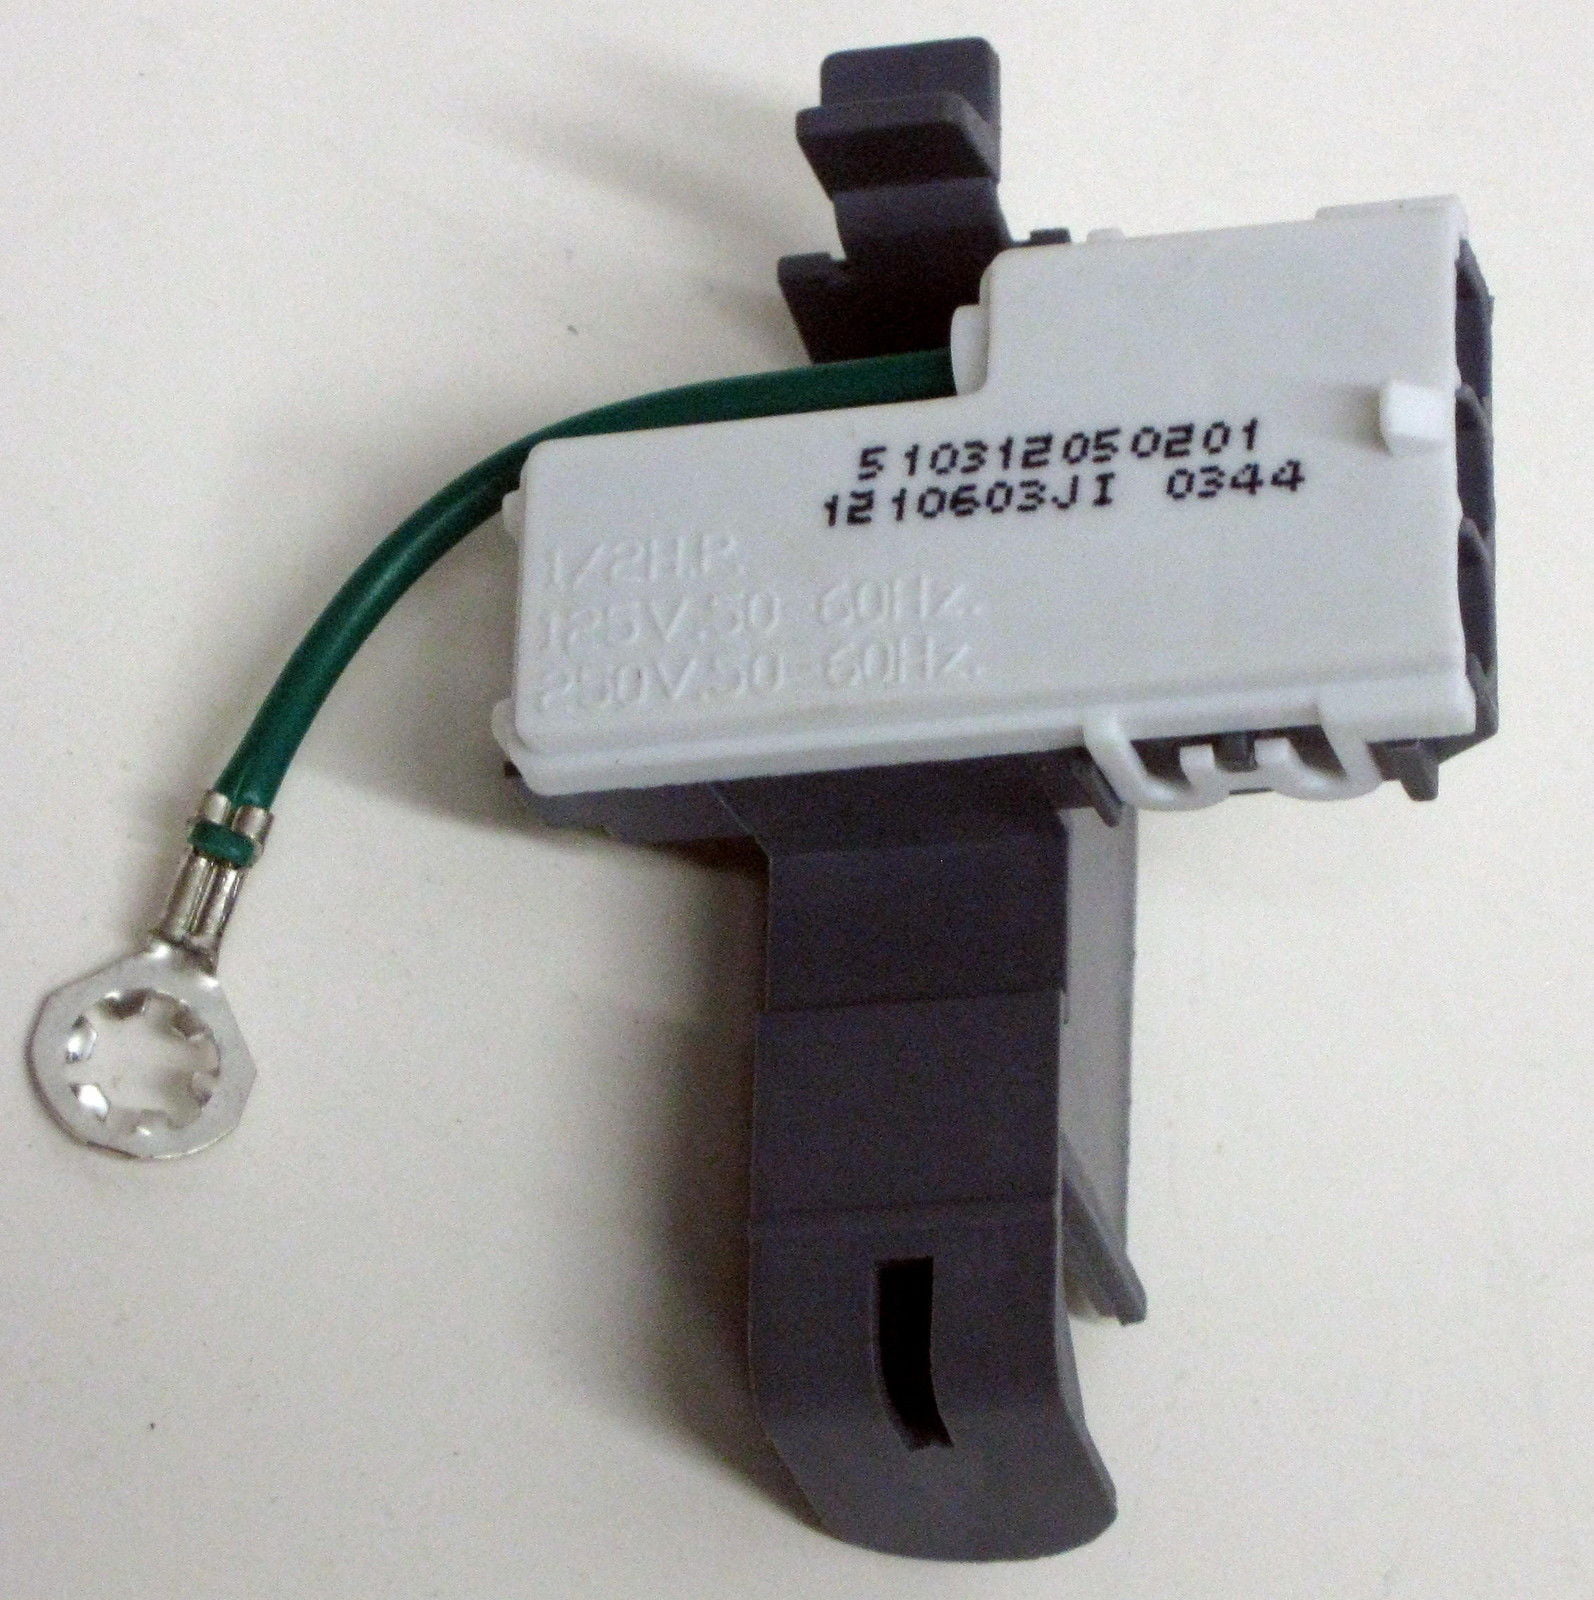 PS11745957 Washer Lid Switch Assembly Compatible With Whirlpool Washers